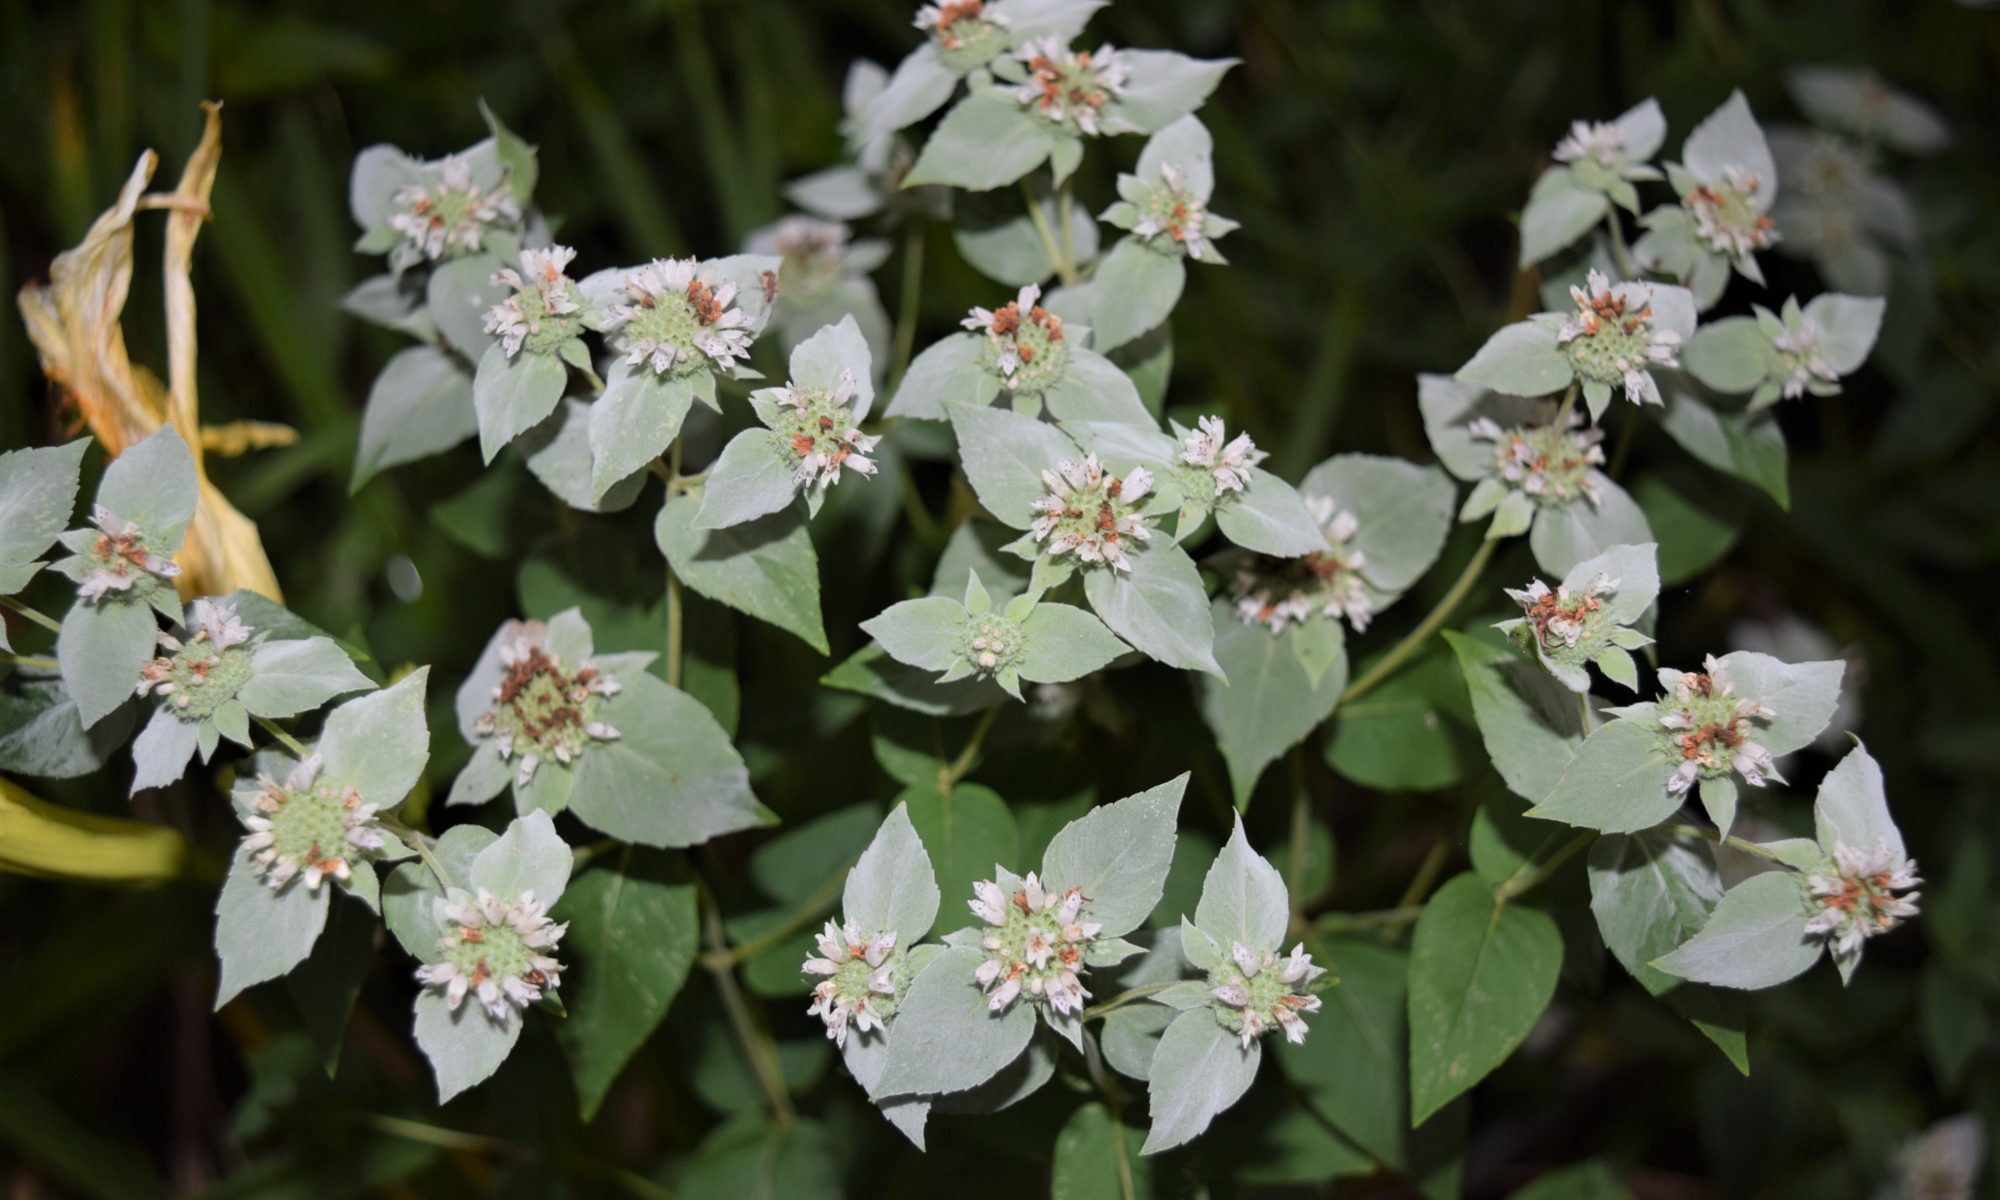 Mountain mint blooms and foliage